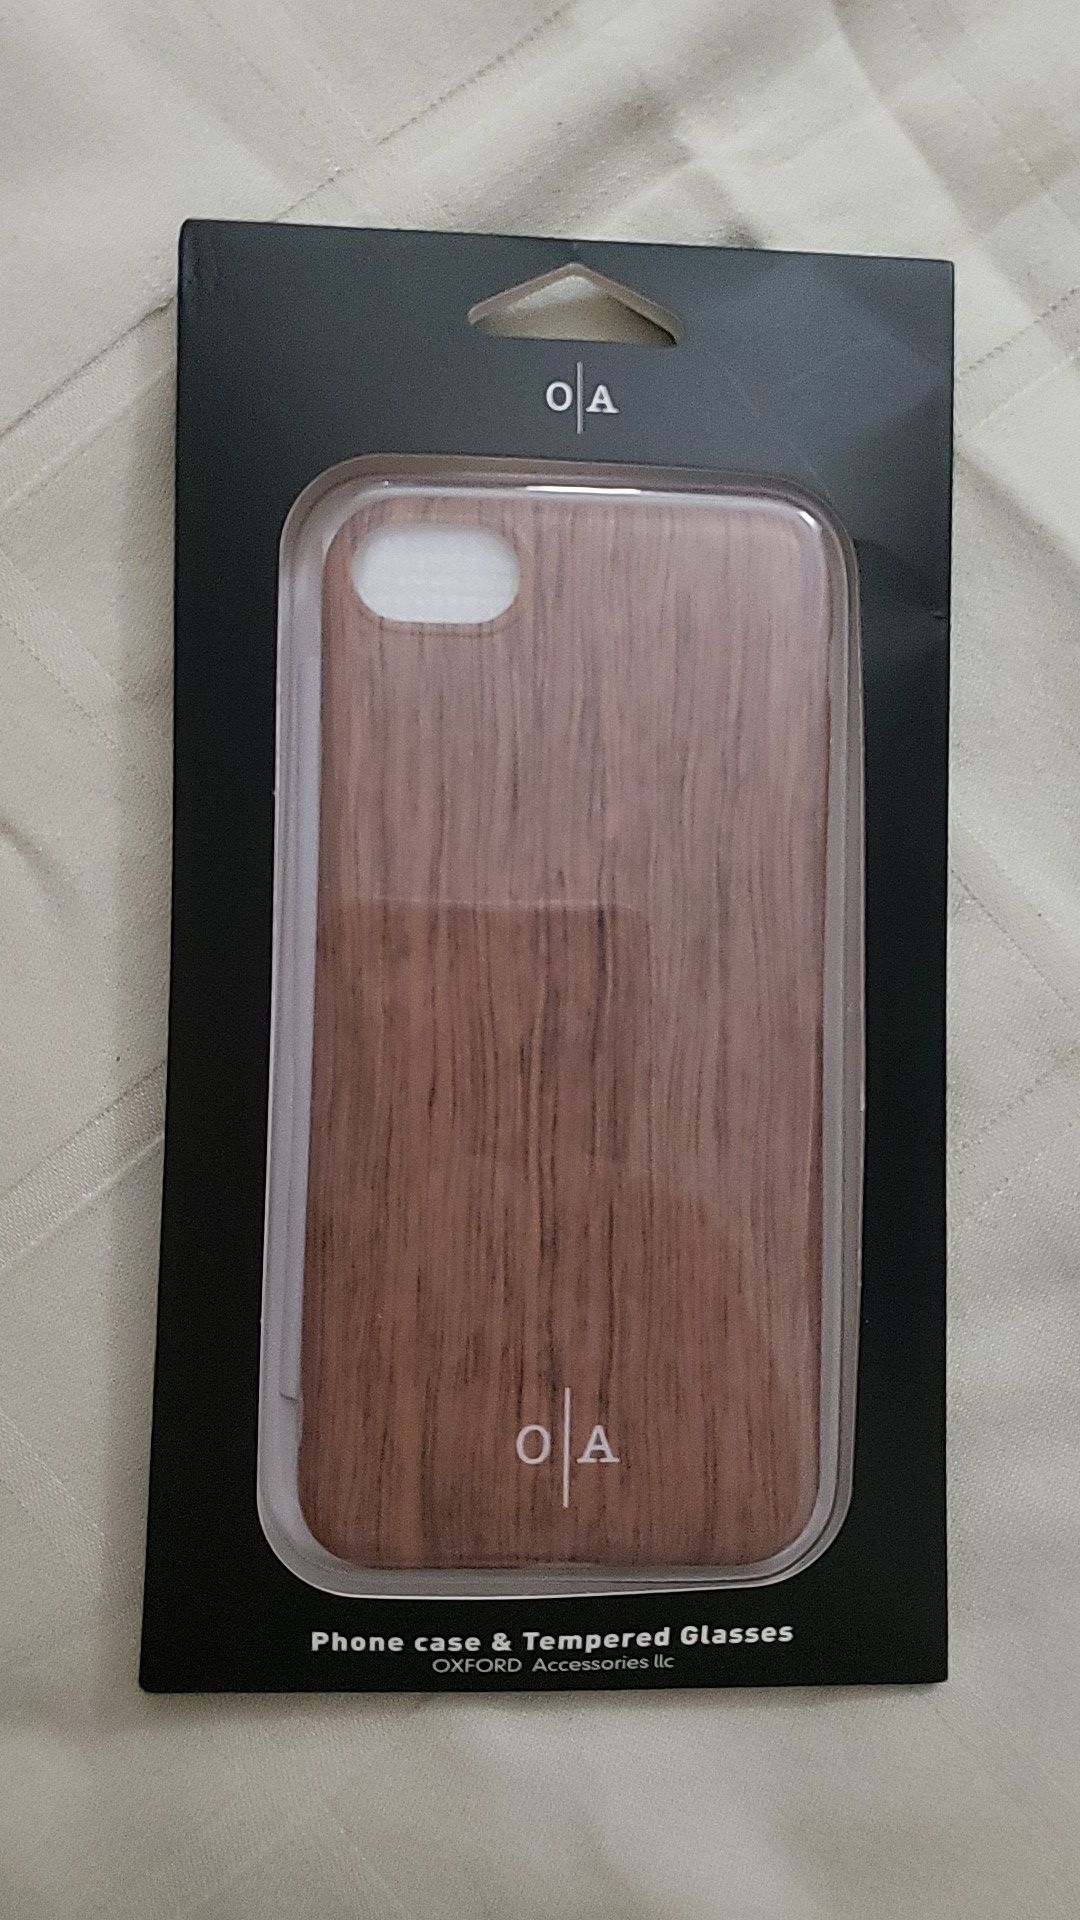 Wood like iPhone 6 case and glass protector